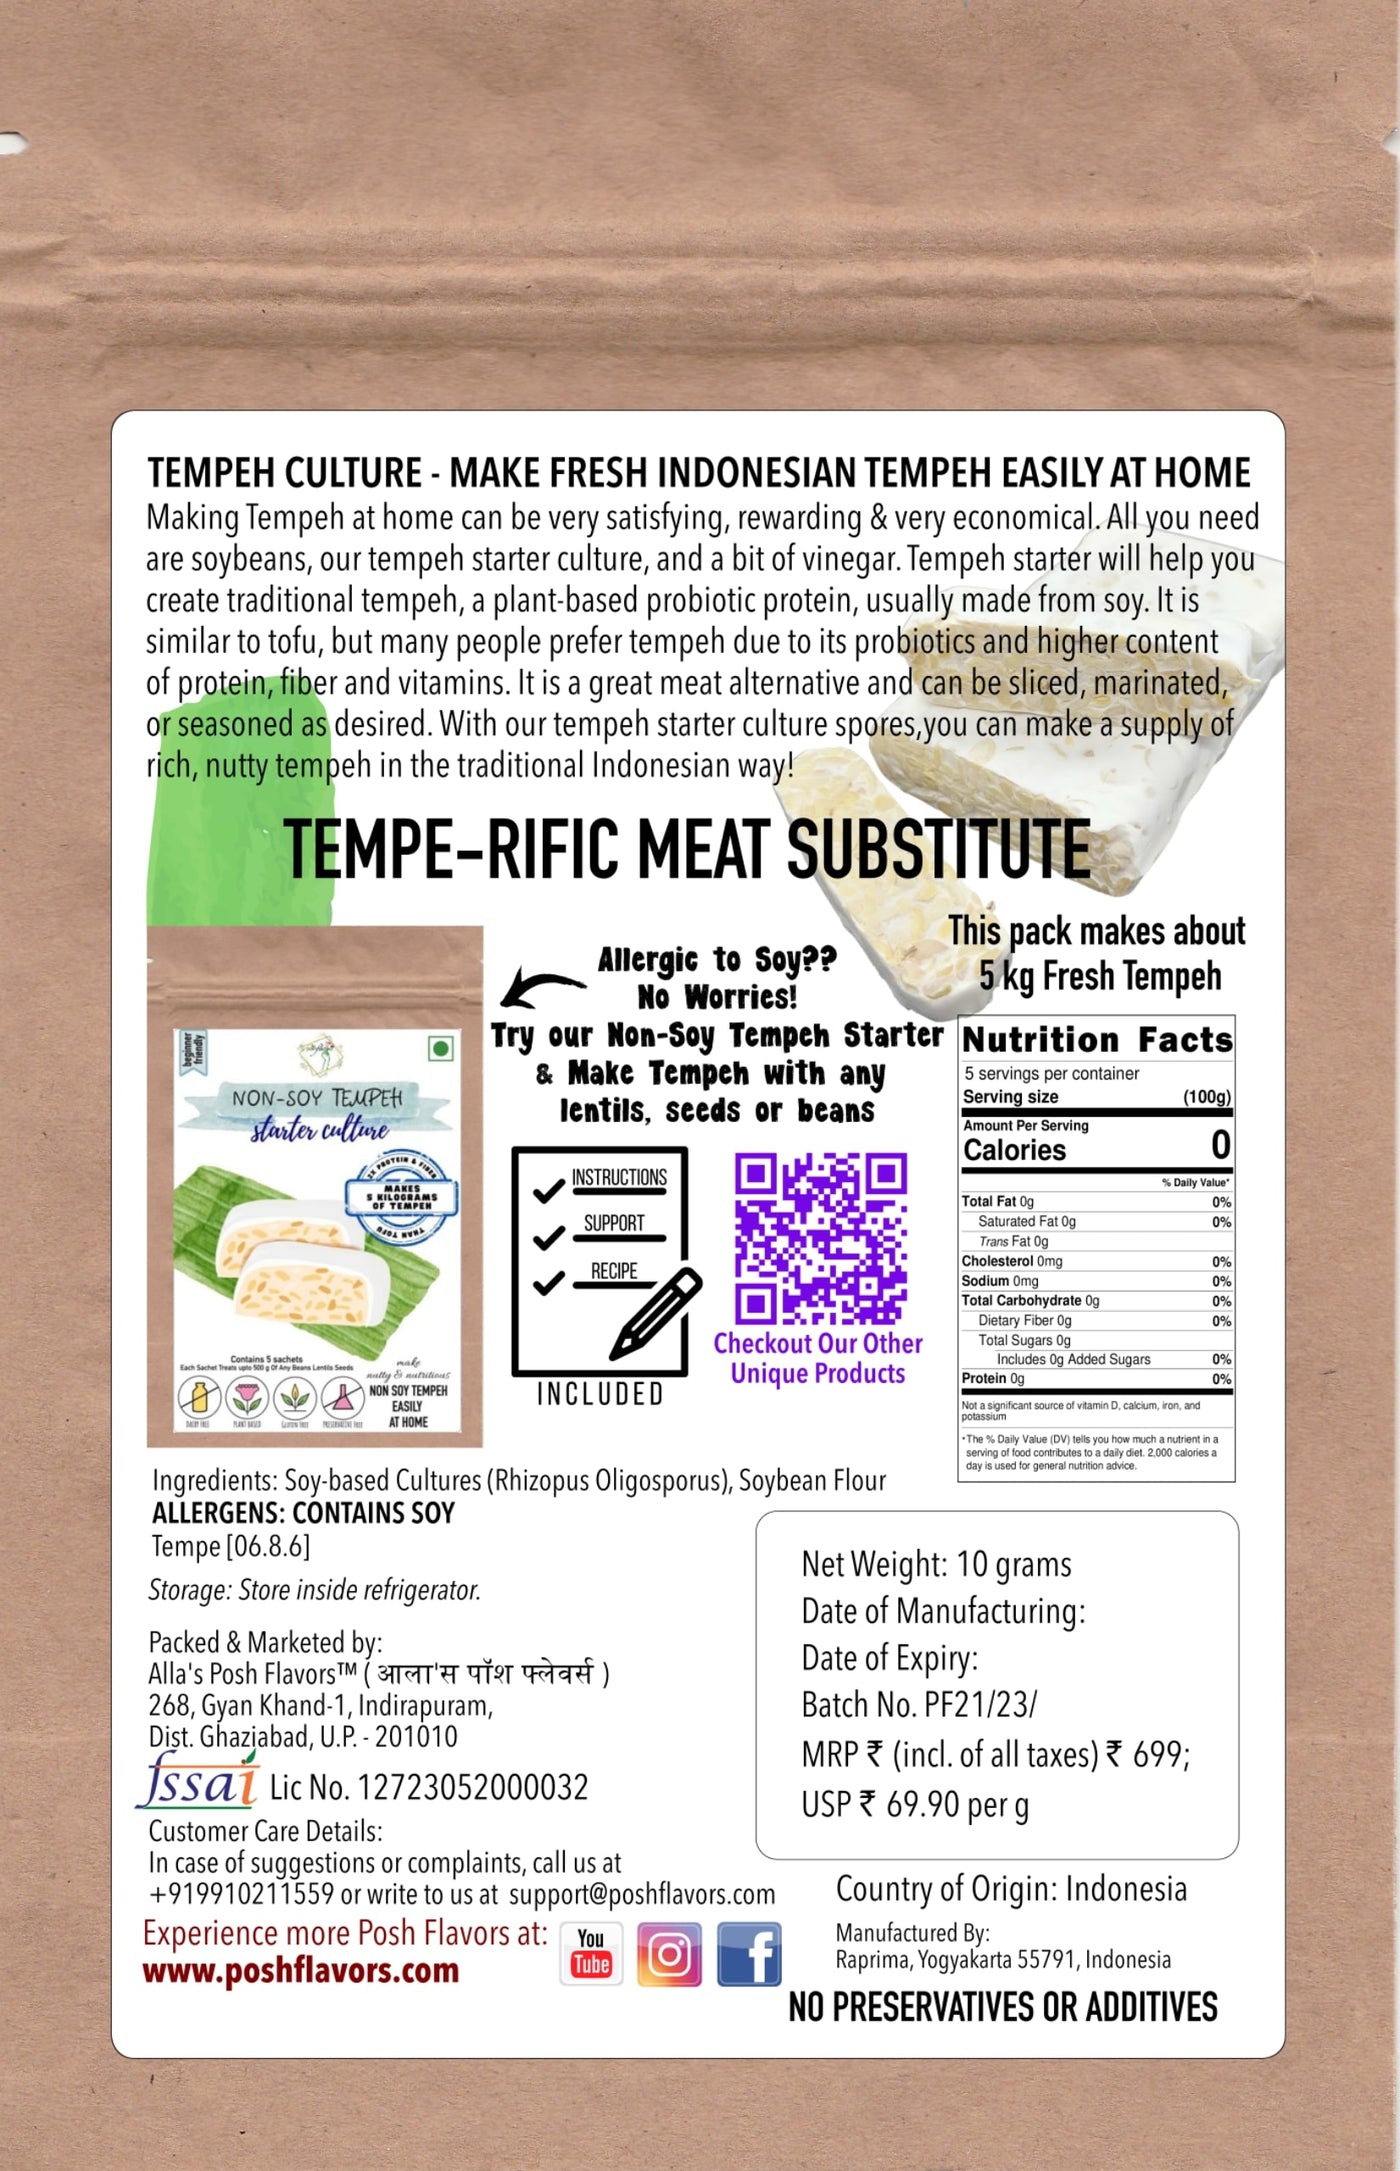 Alla's Posh Flavors Soy Tempeh Starter Culture | Makes 5 kg of Fresh Tempeh